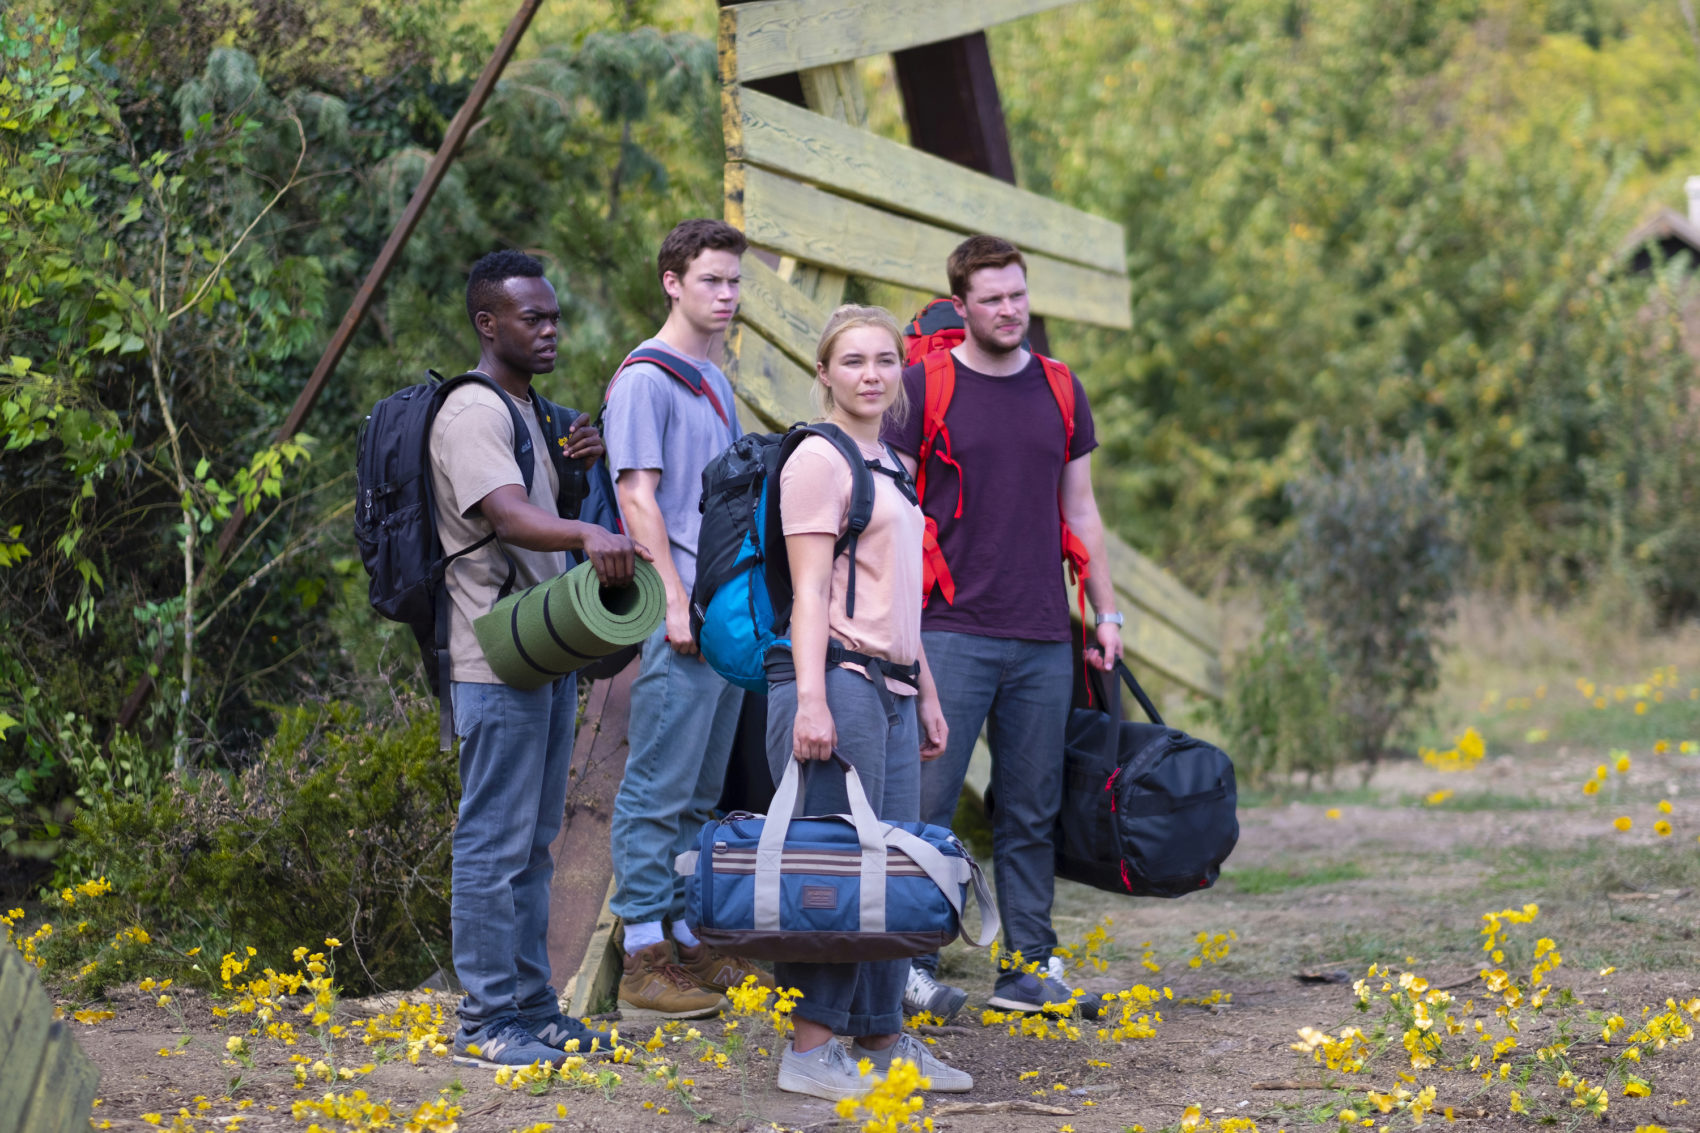 Left to right: William Jackson Harper, Will Poulter, Florence Pugh and Jack Reynor in Ari Aster's horror film &quot;Midsommar.&quot; (Courtesy A24)